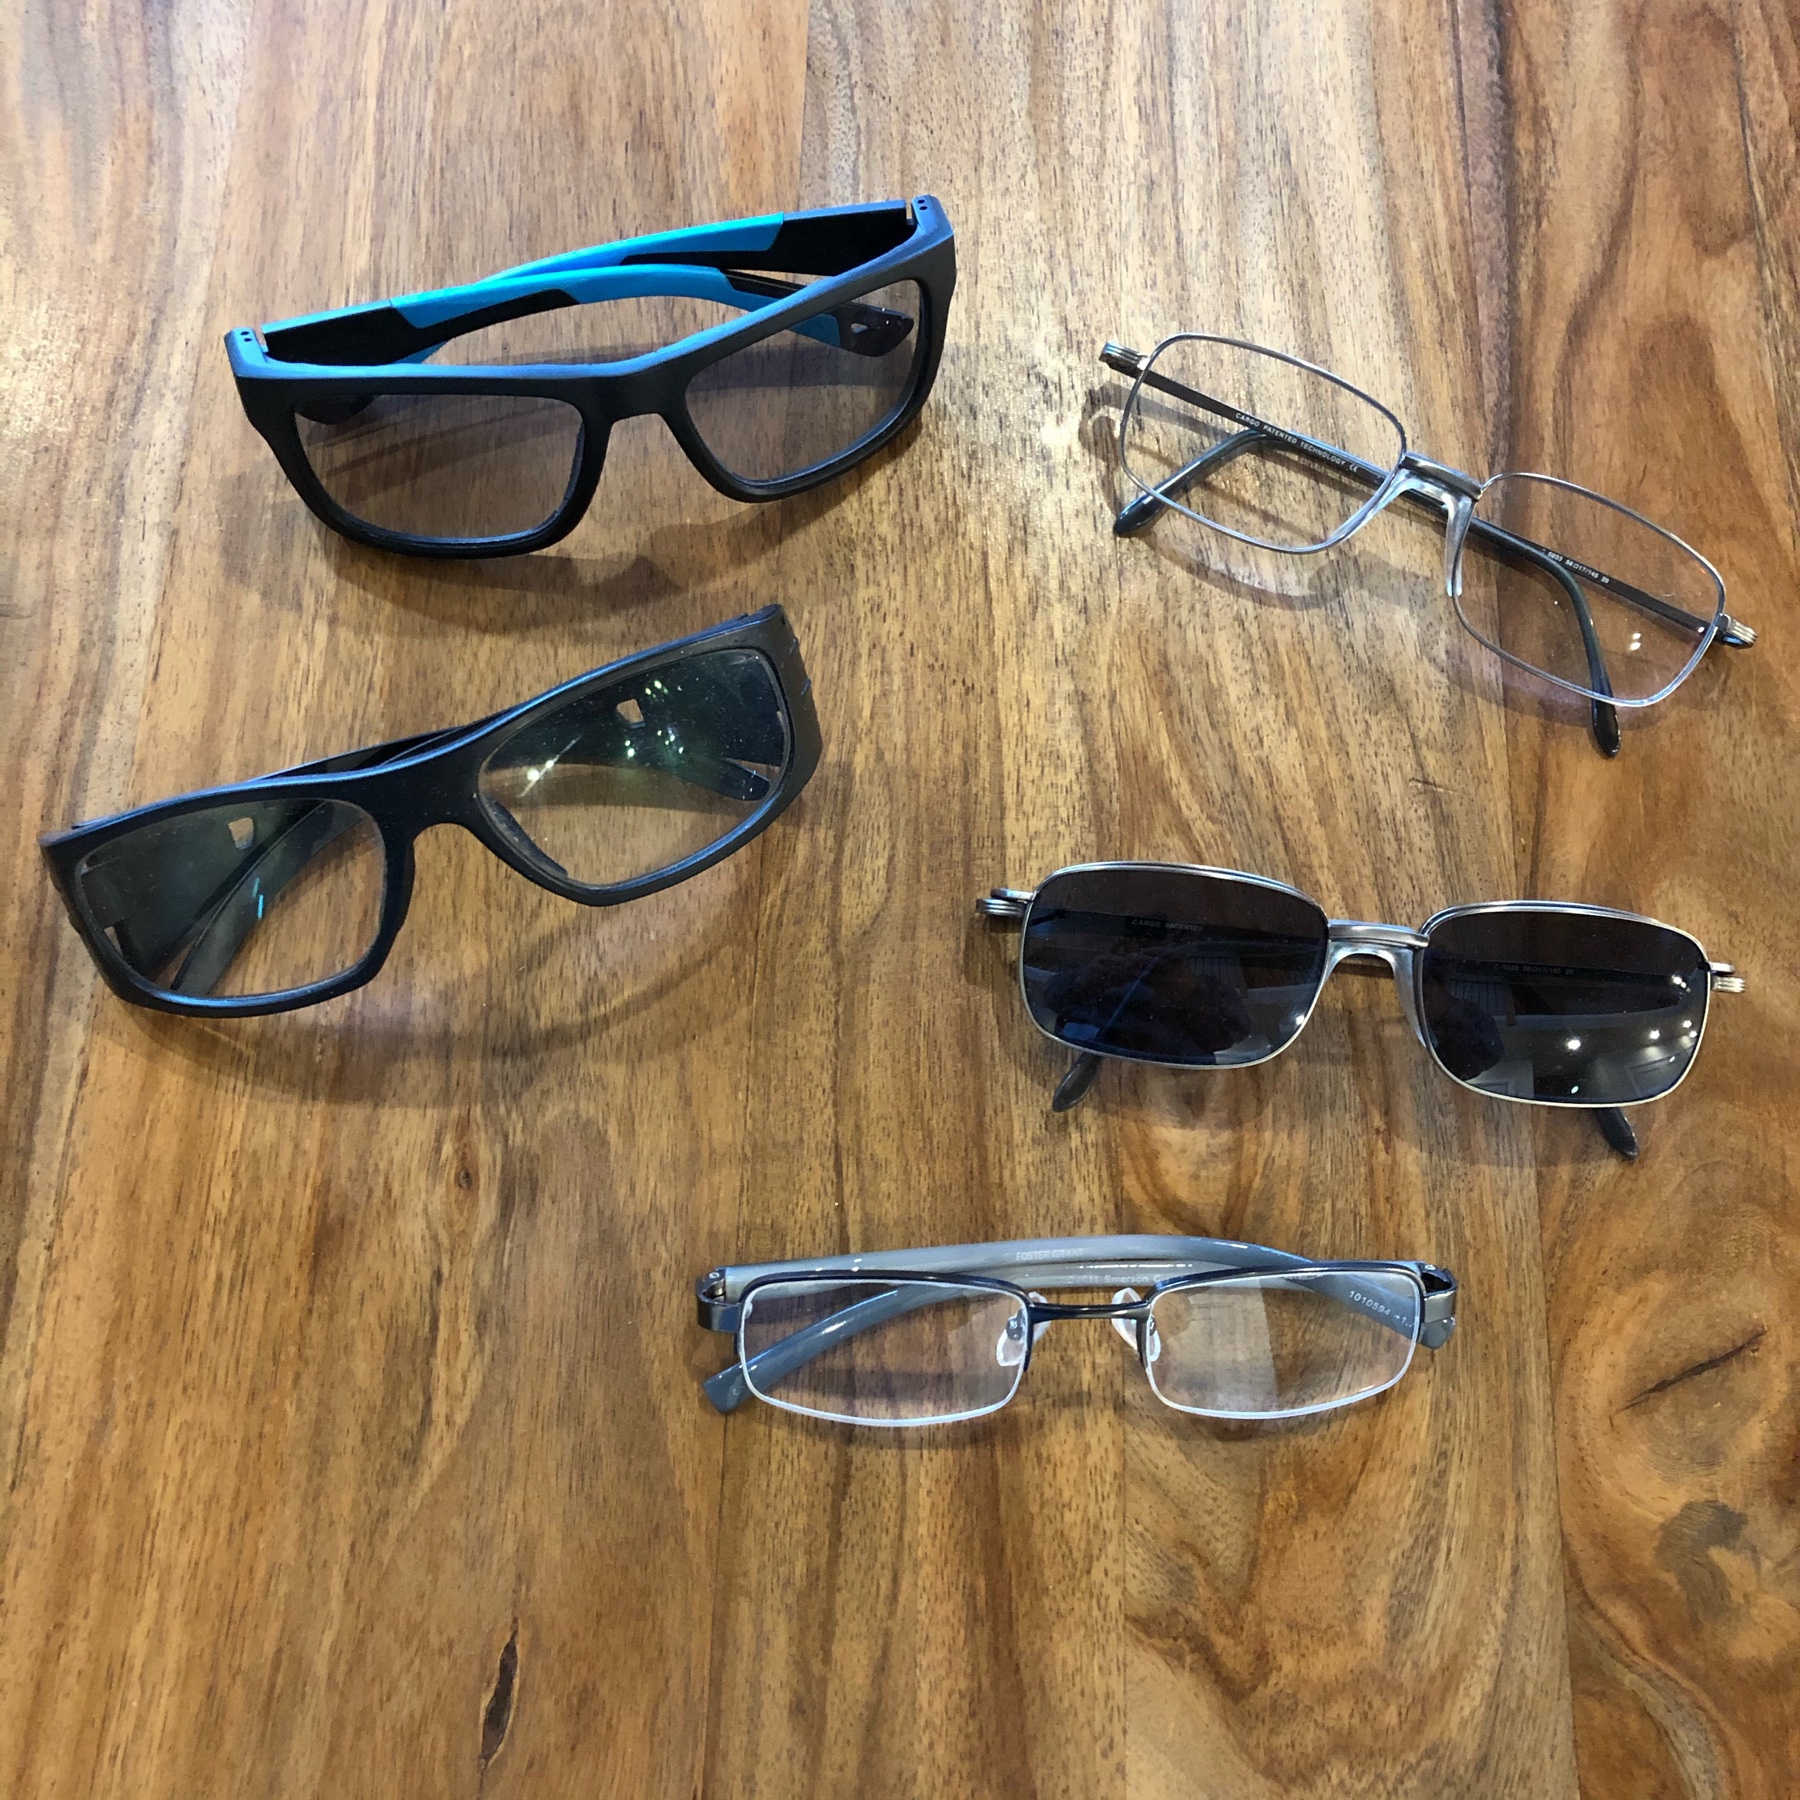 Five pair of glasses. One pair is sunglasses and two pair are safety glasses. they are sitting on a wooden table